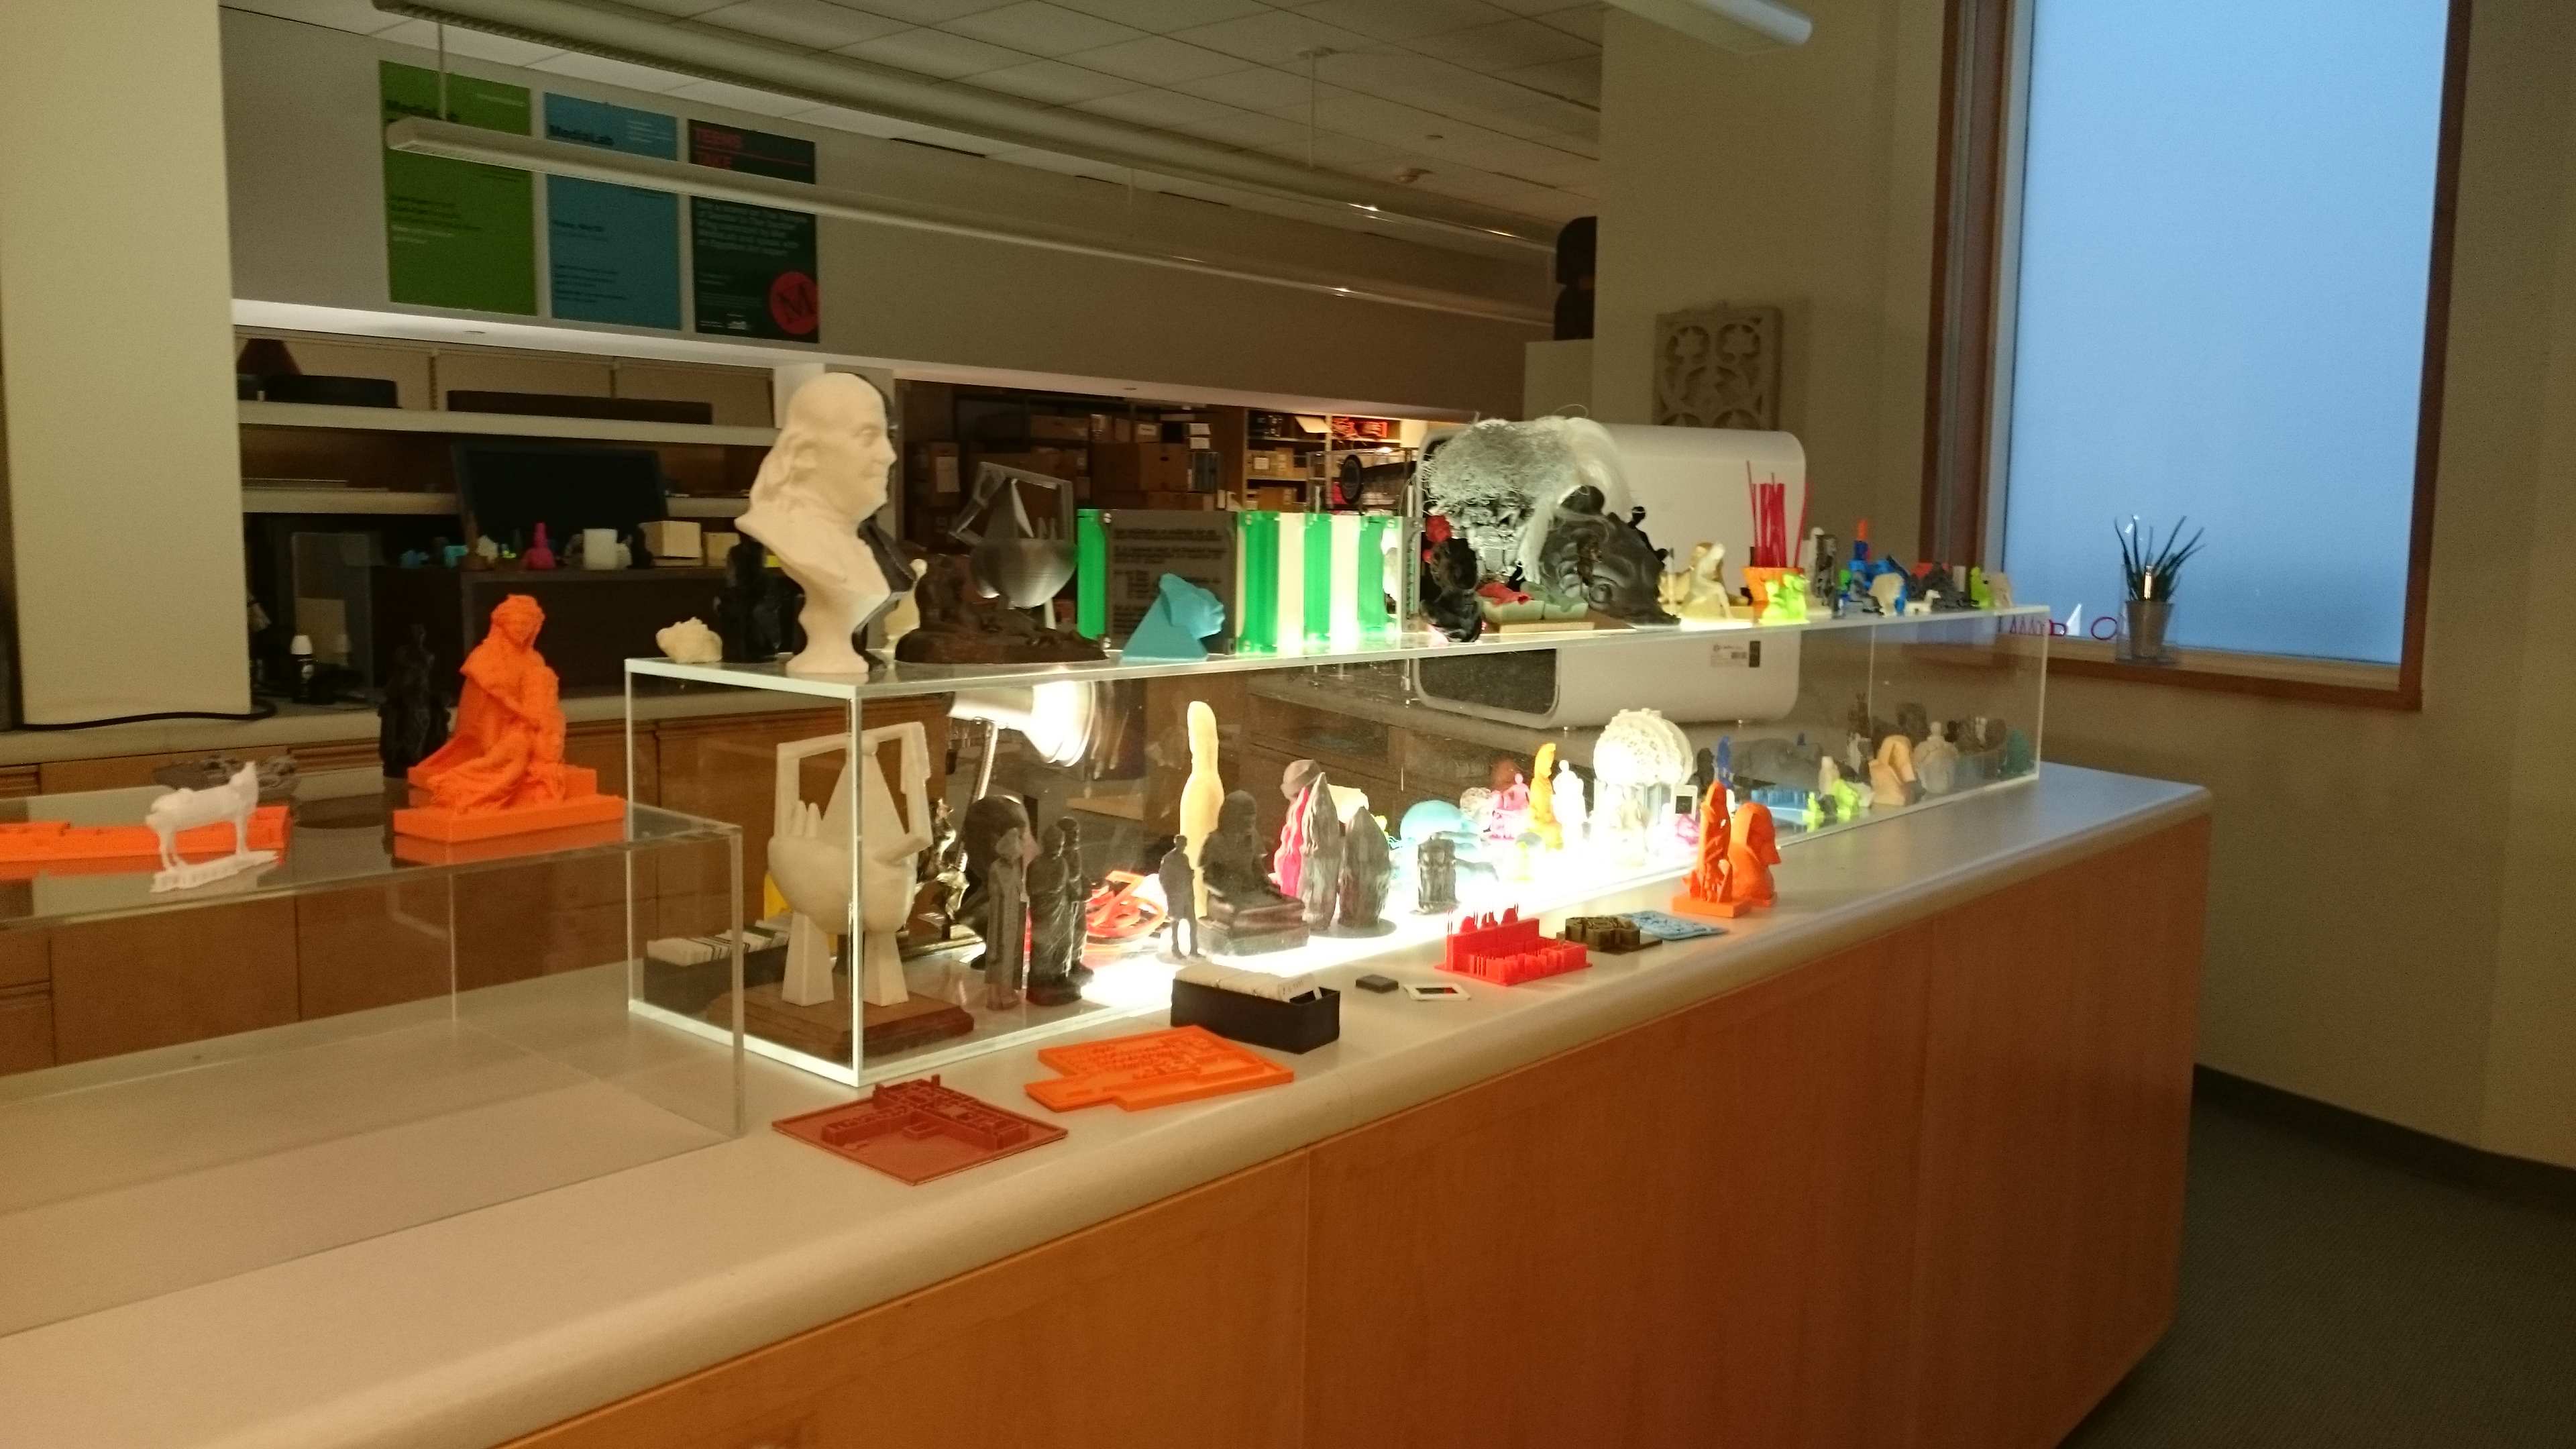 3D printing in the MediaLab